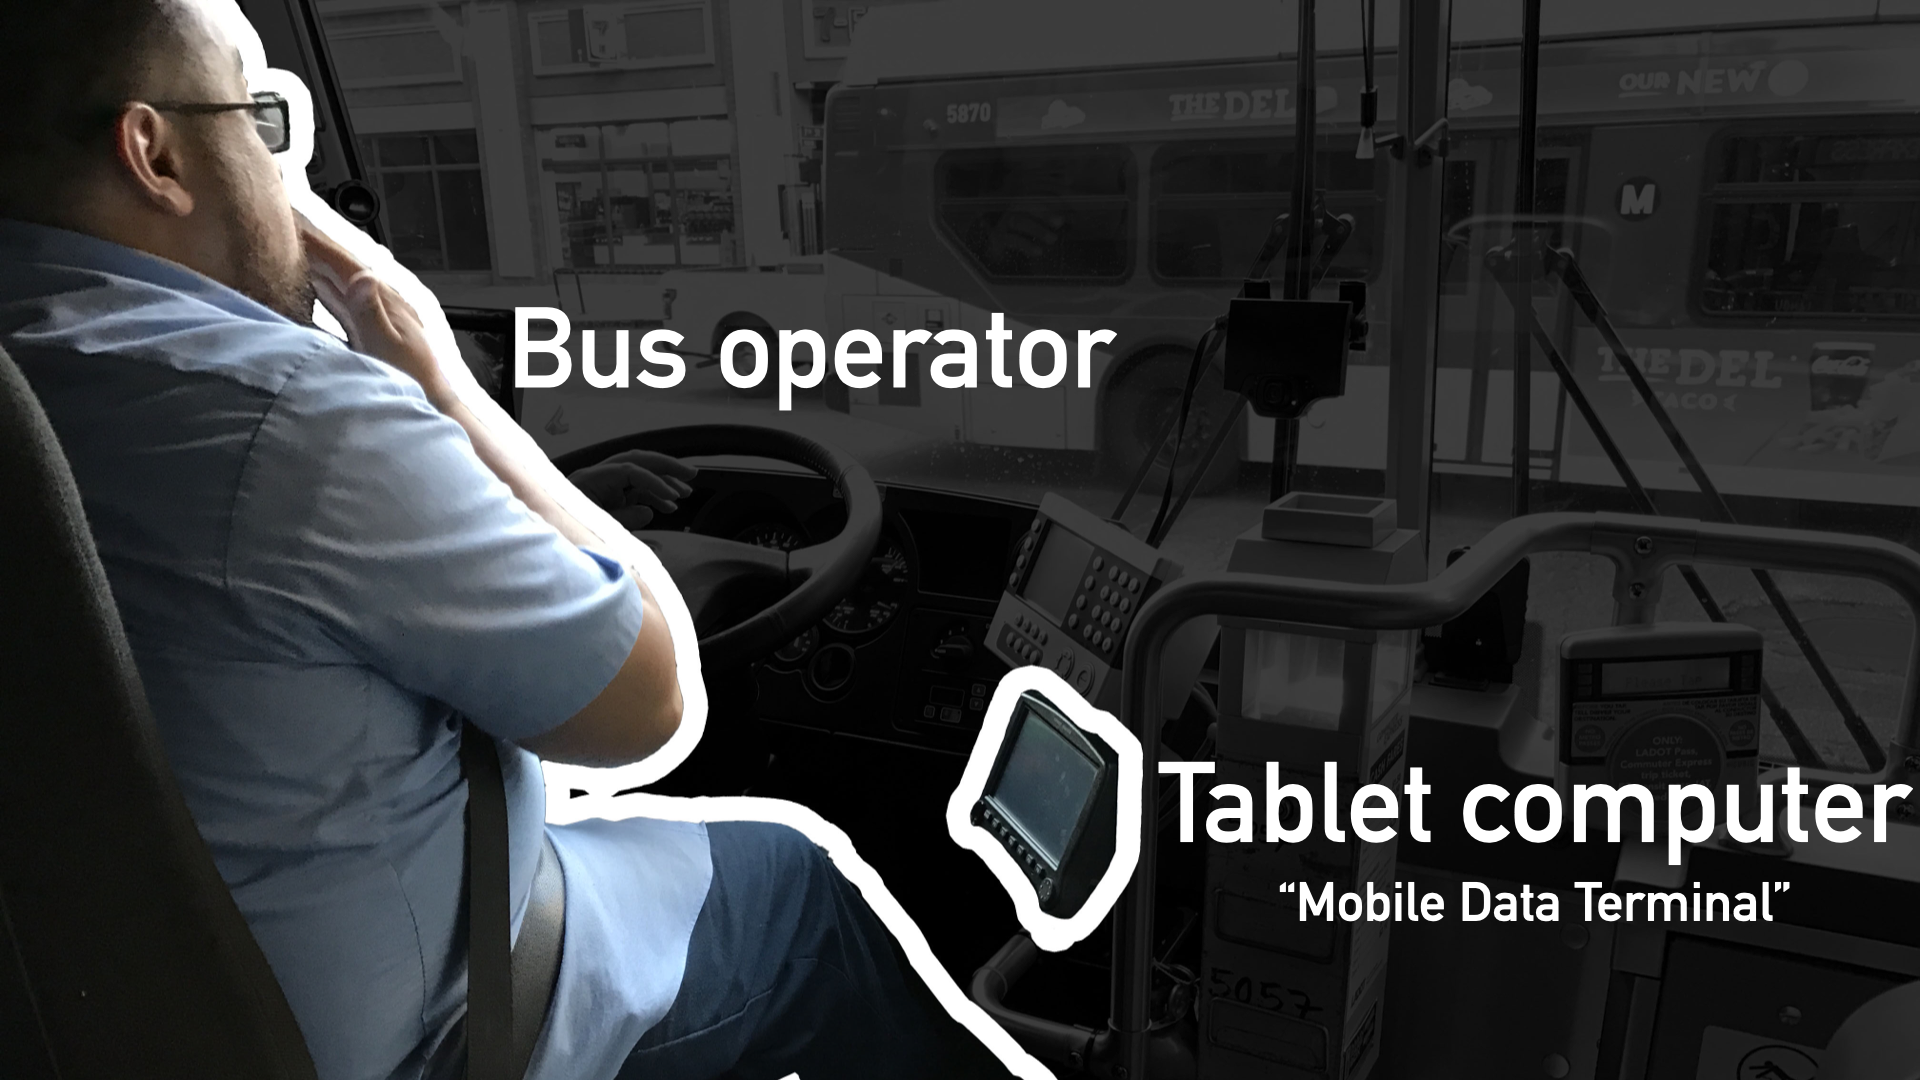 photo of a bus operator and a tablet computer (mobile data terminal) onboard a transit bus